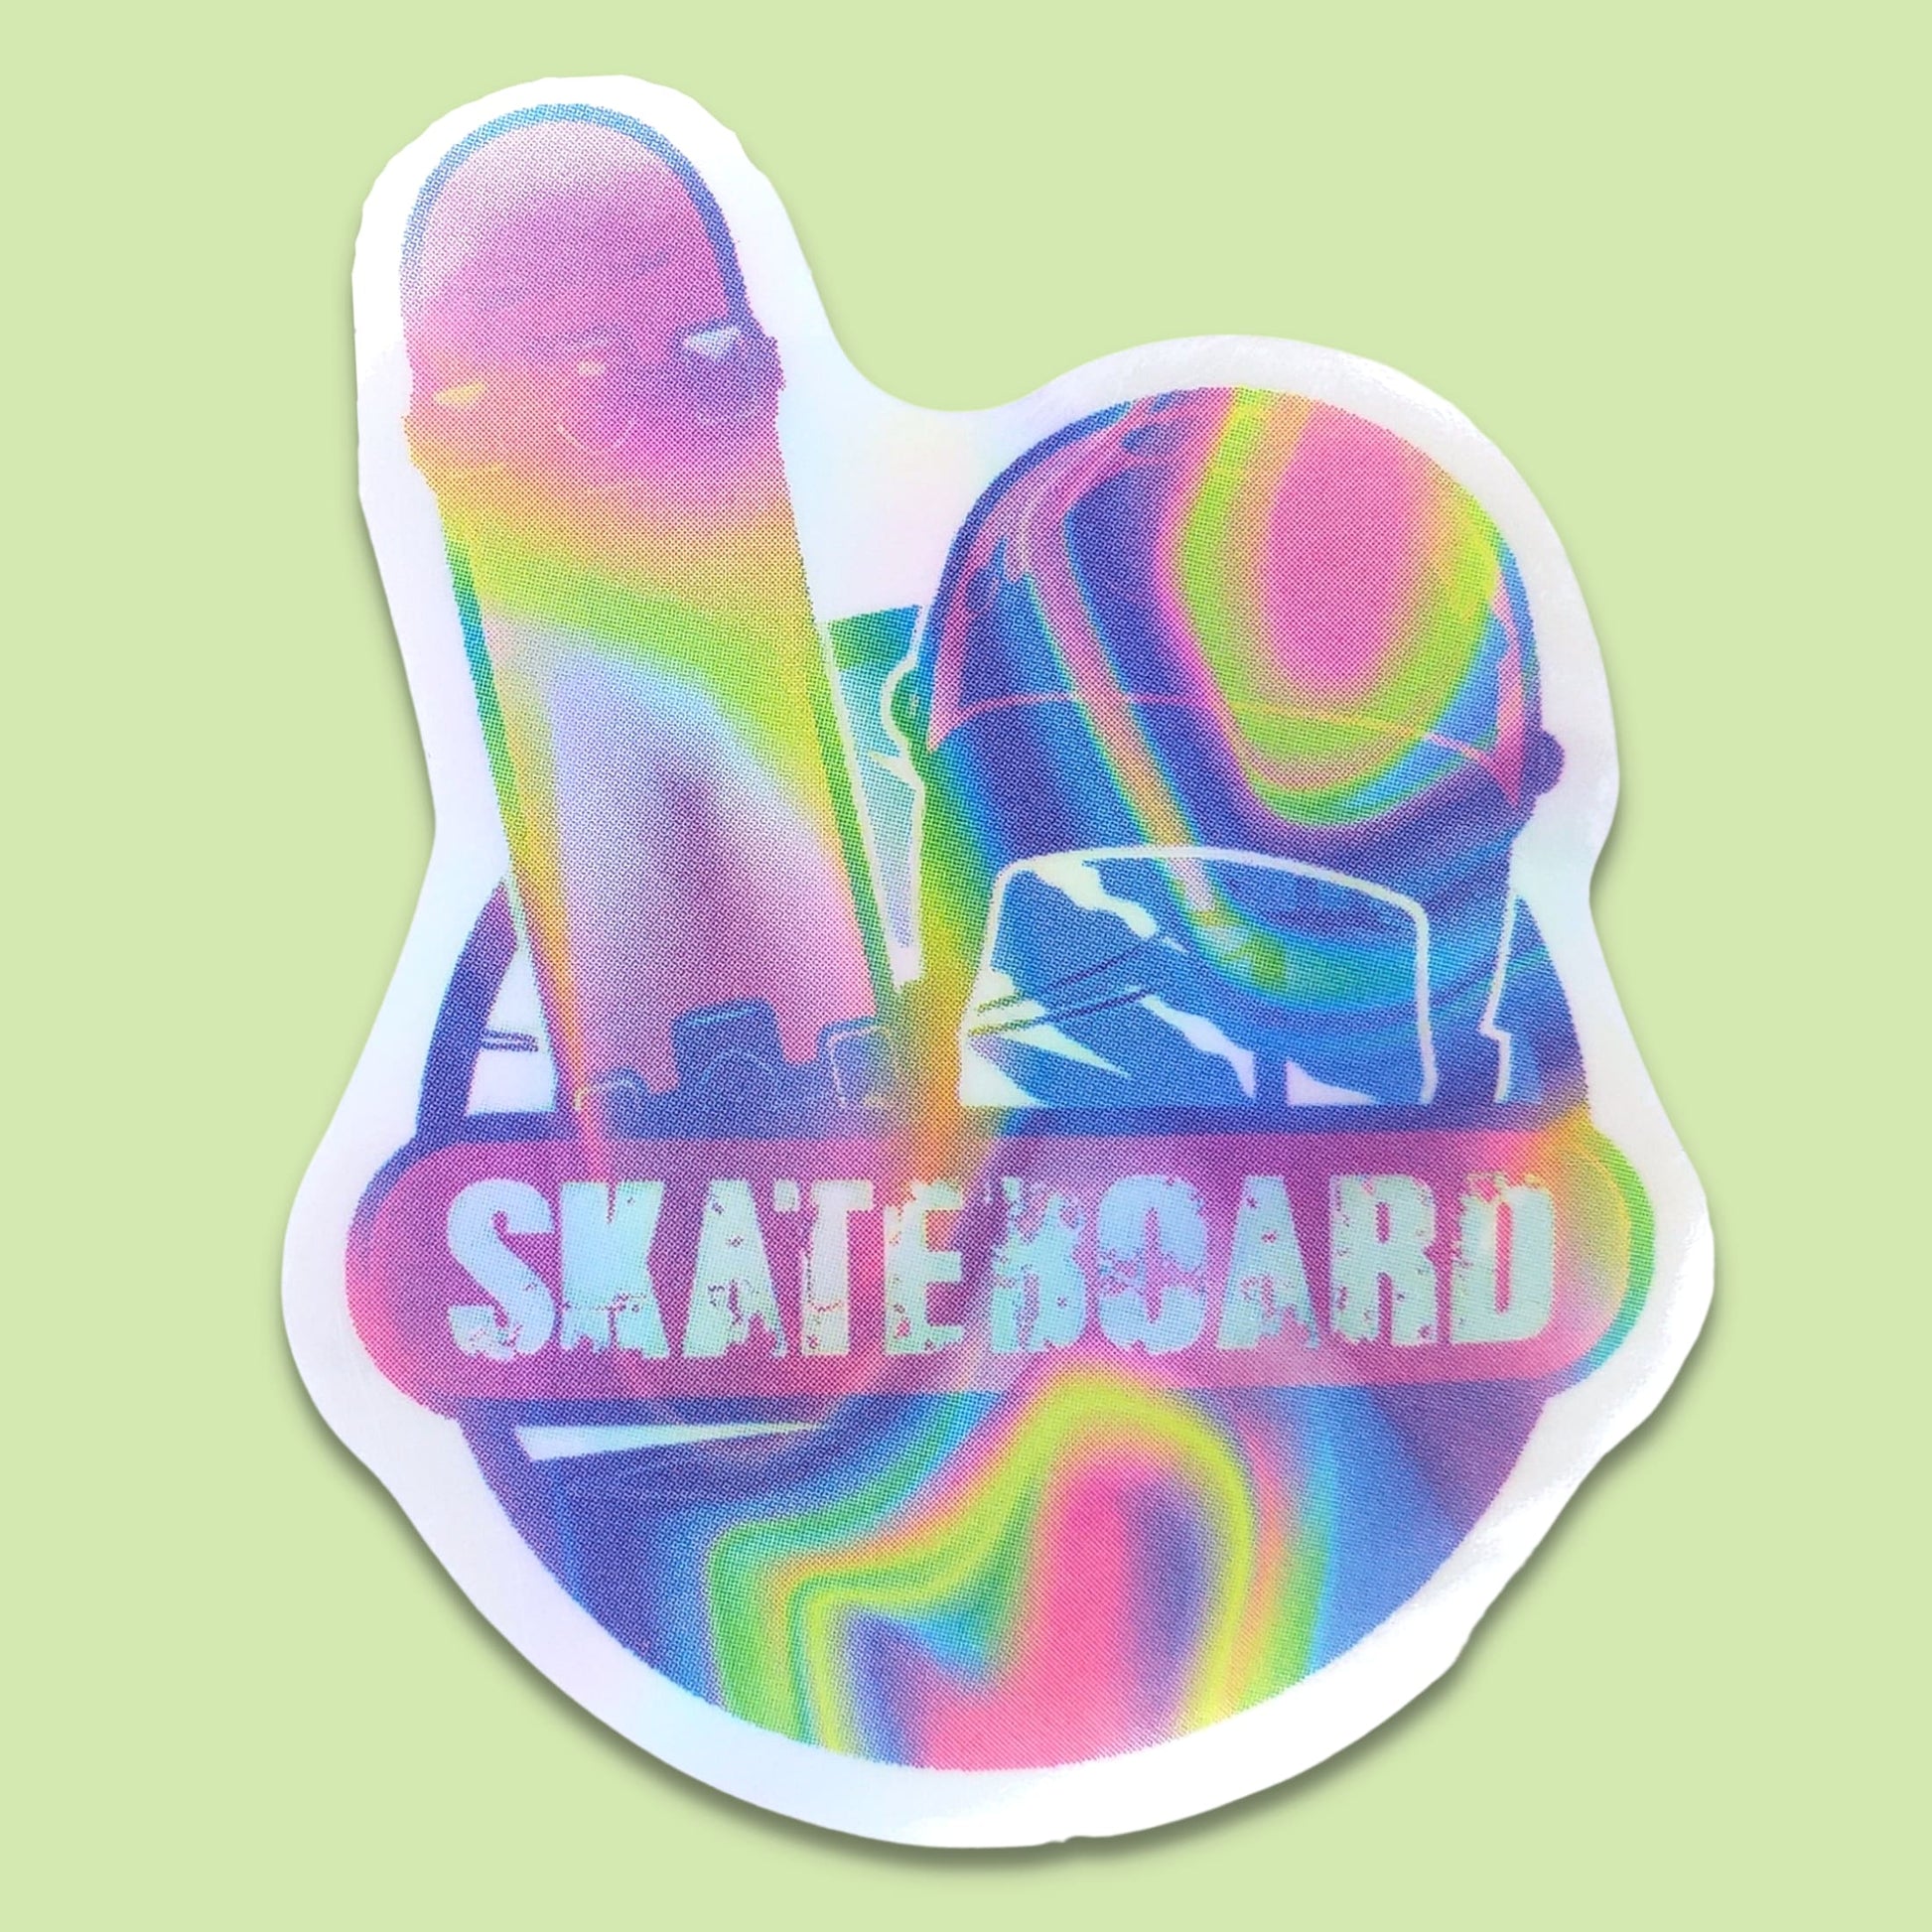 Holographic Skateboard Waterproof Sticker from Confetti Kitty, Only 1.0